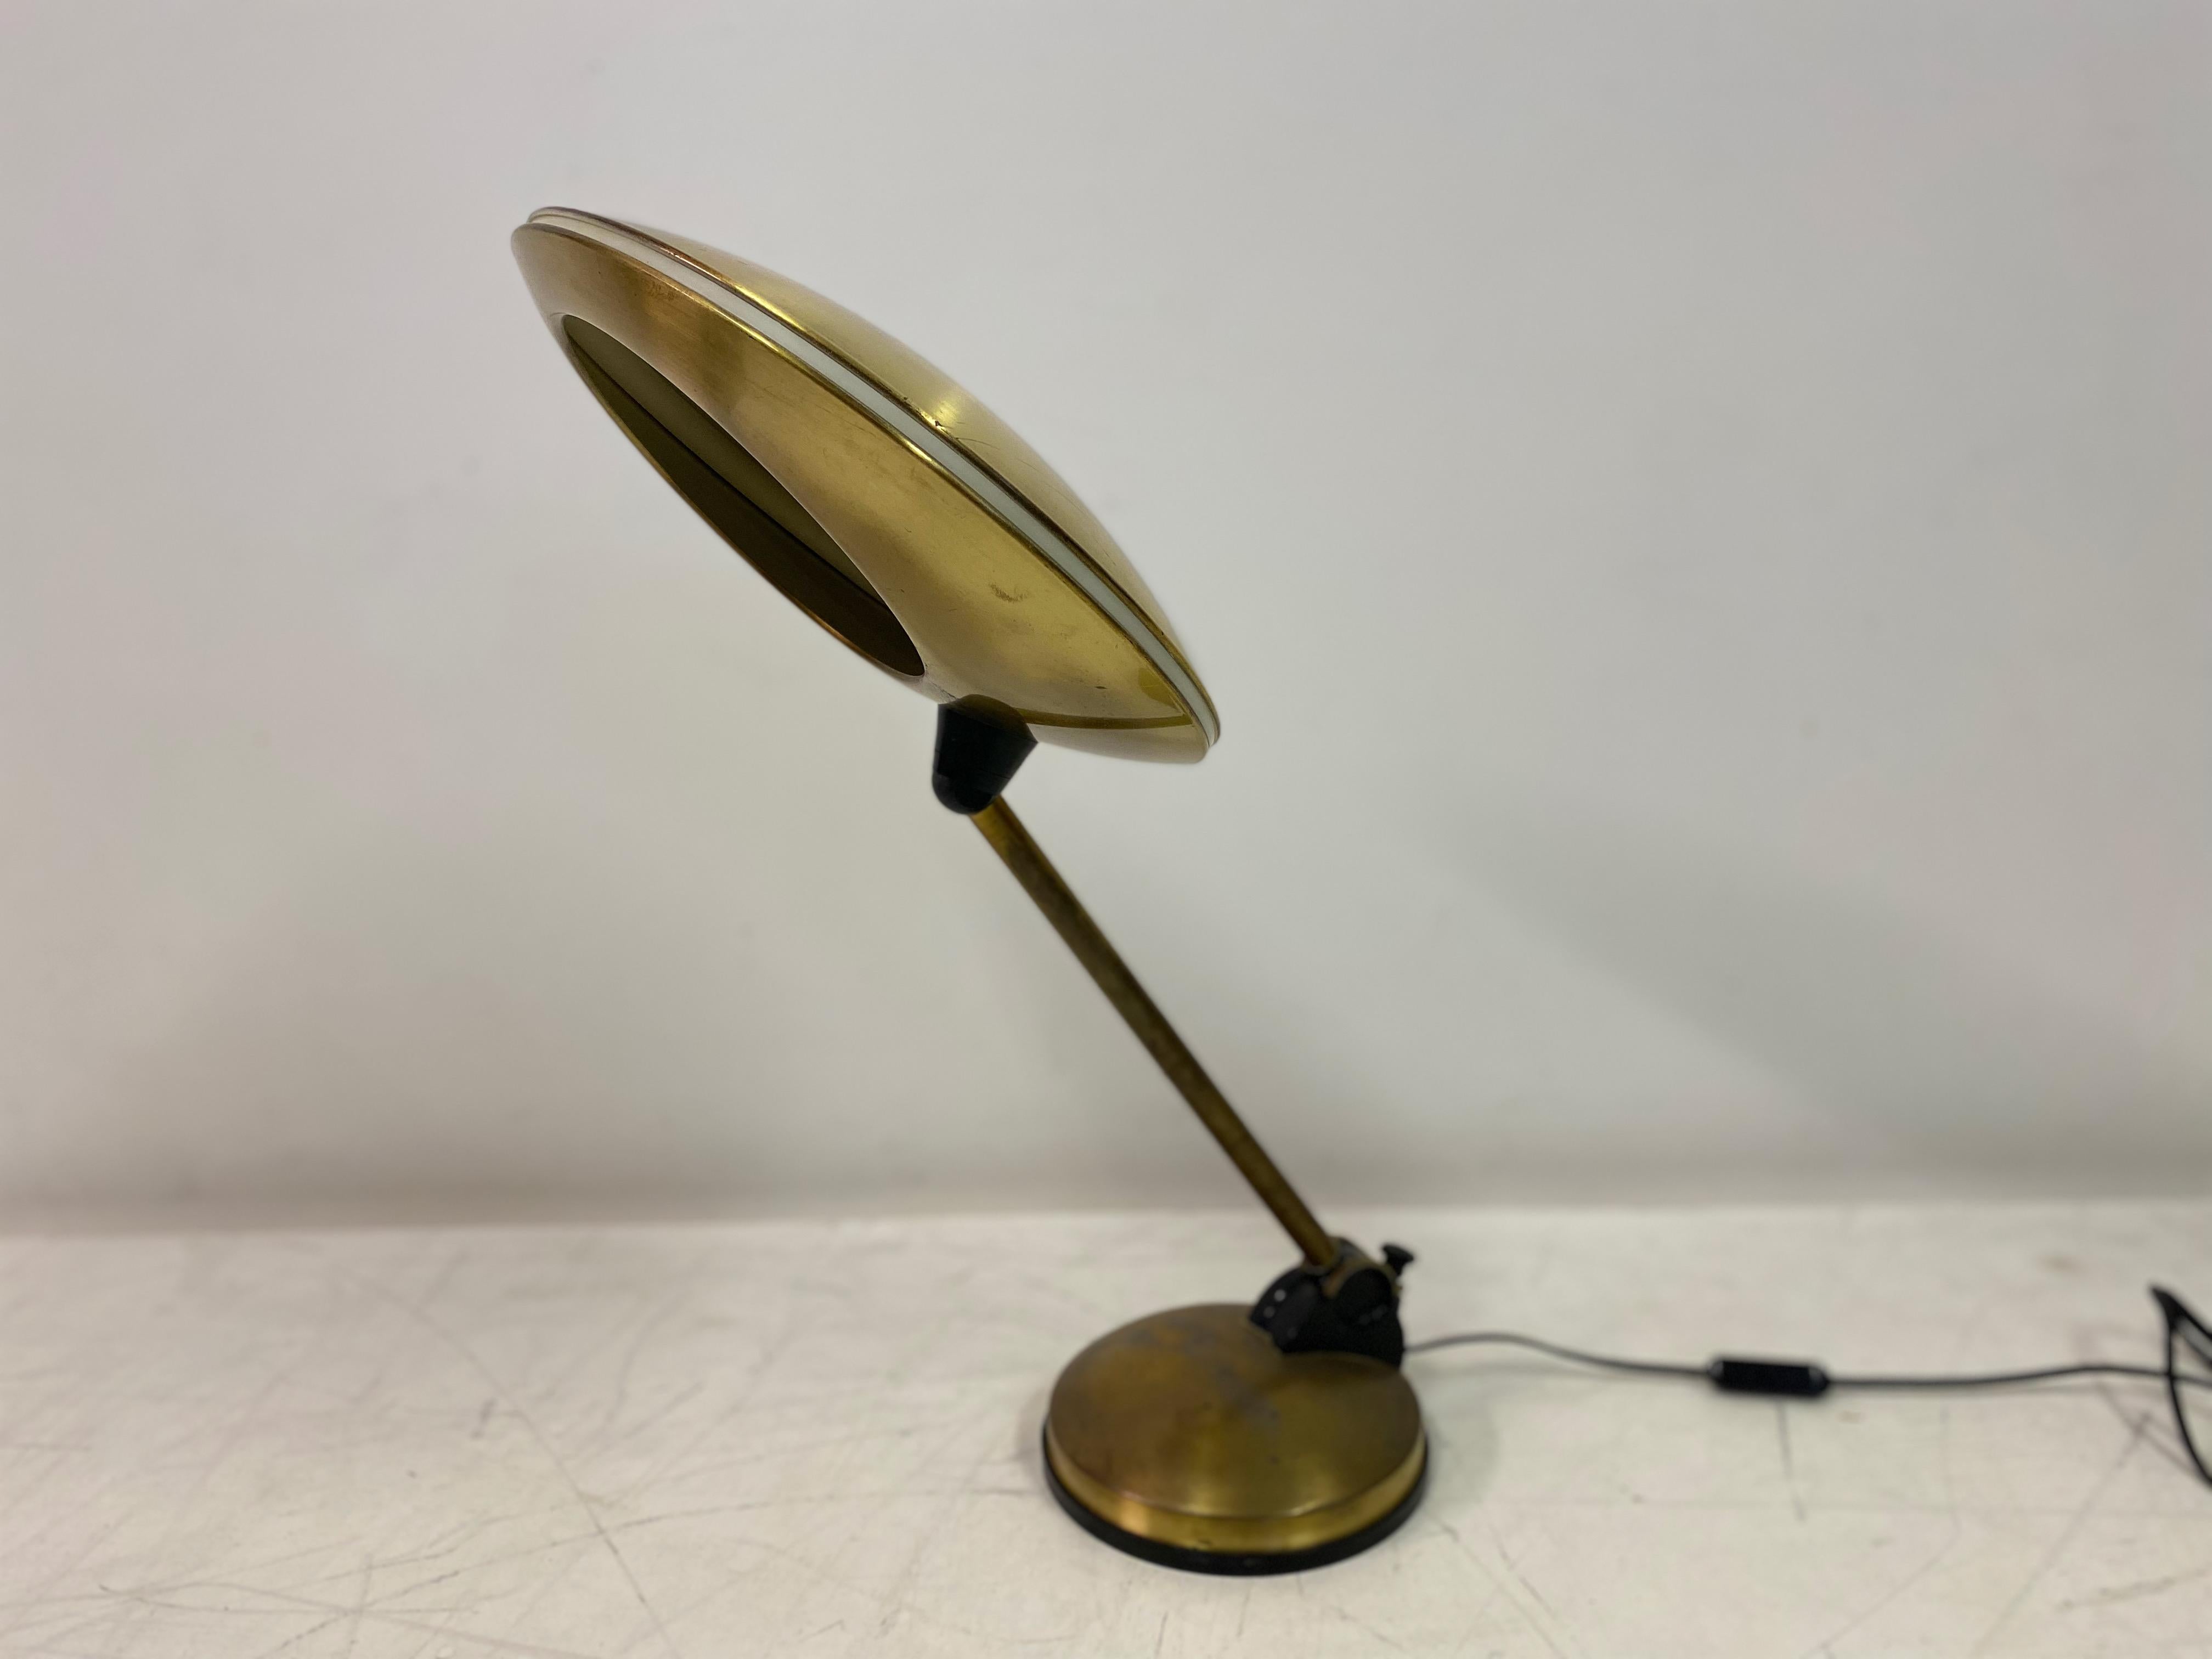 Desk or table lamp

Brass

Saucer shaped shade

Stem can be angled from base

Shade is also adjustable

1960s/1970s Italian.